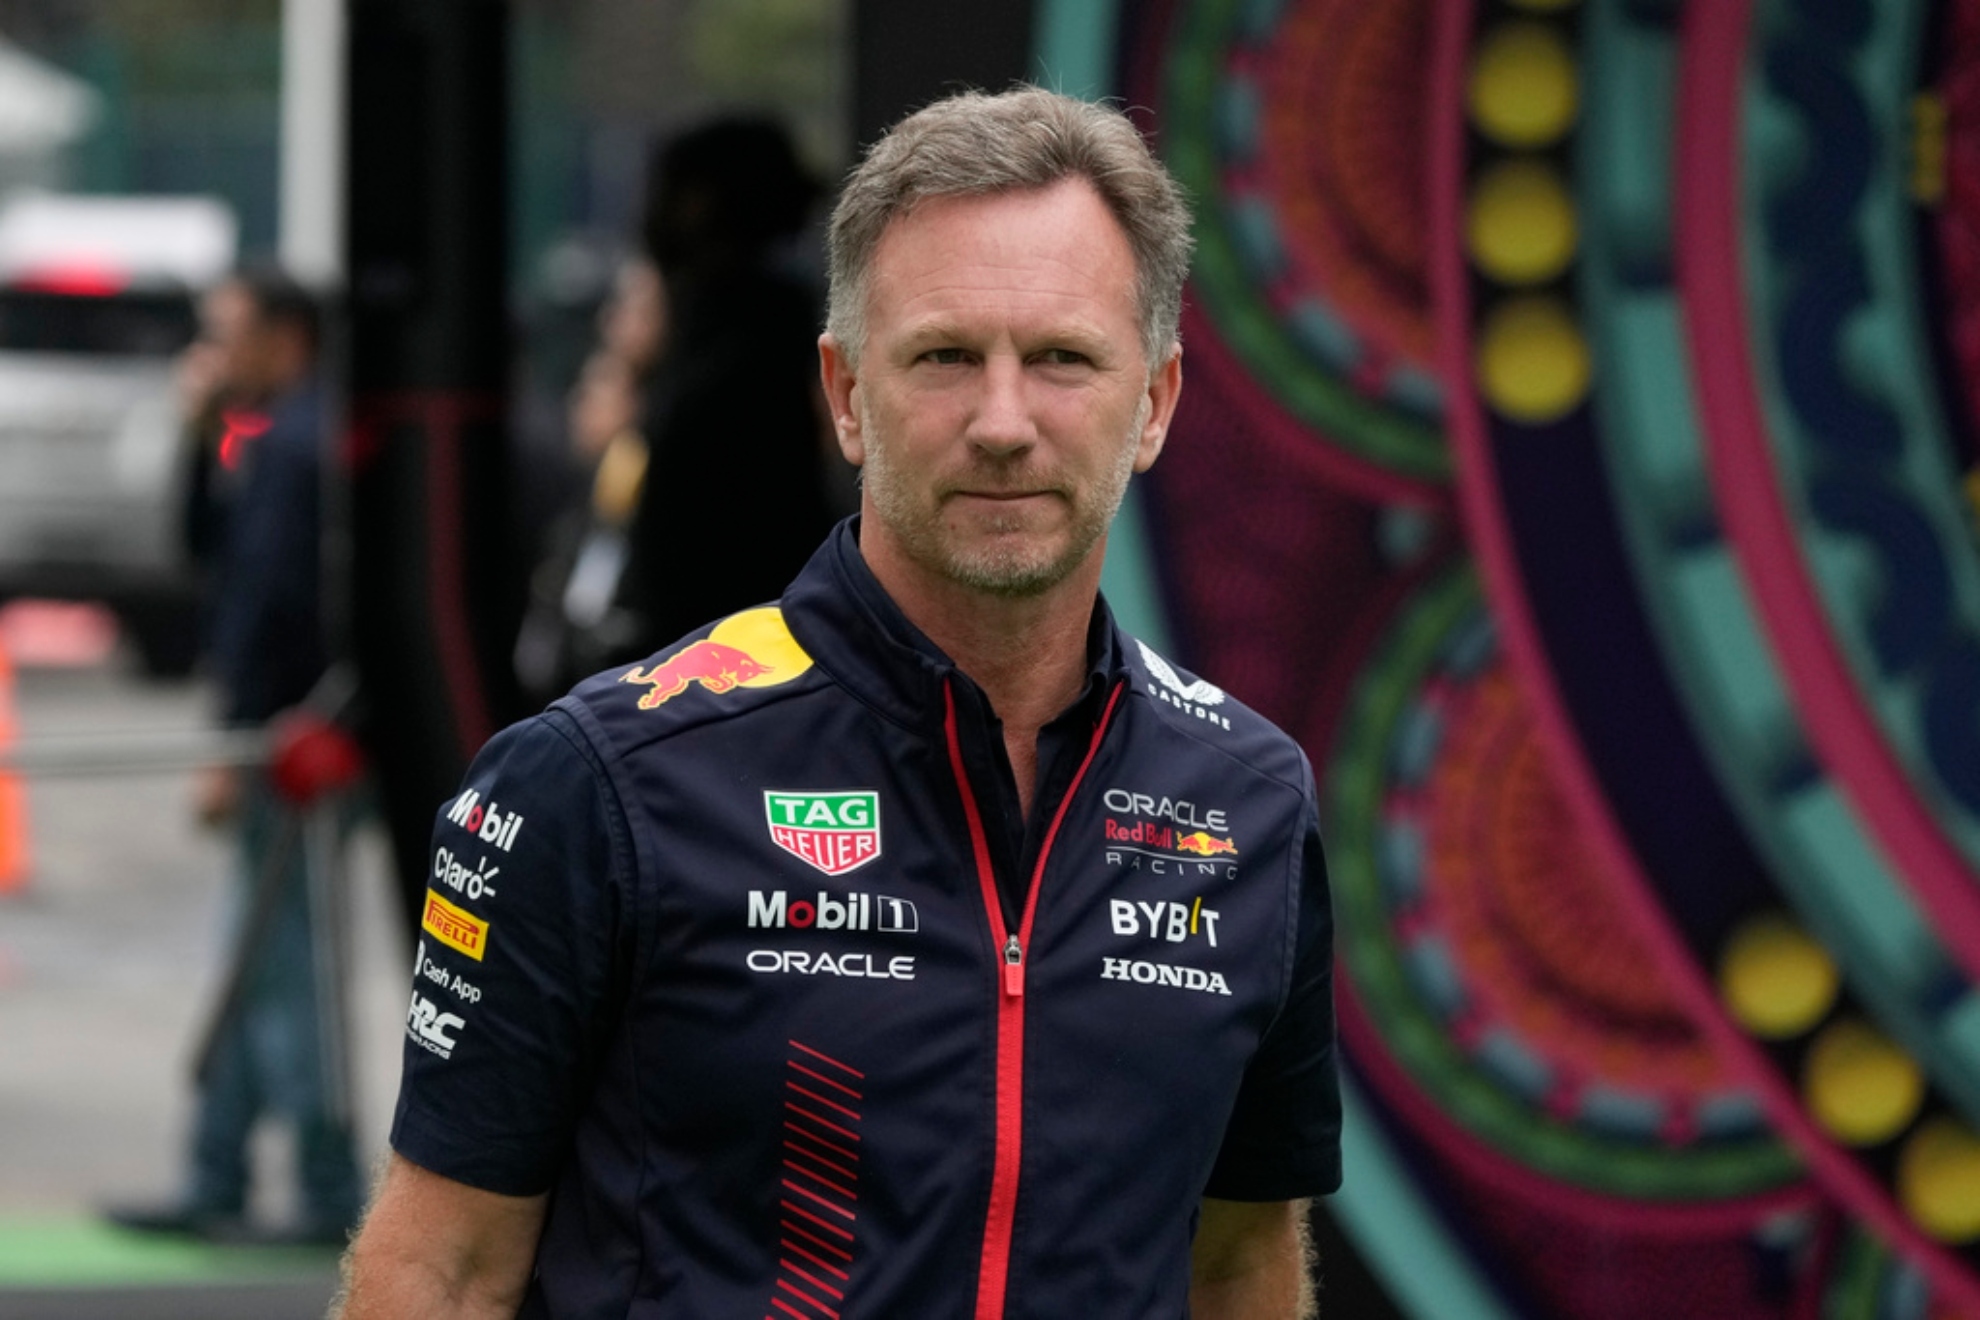 Horner opens up about Checo Perez's continuity with Red Bull during Mexico GP